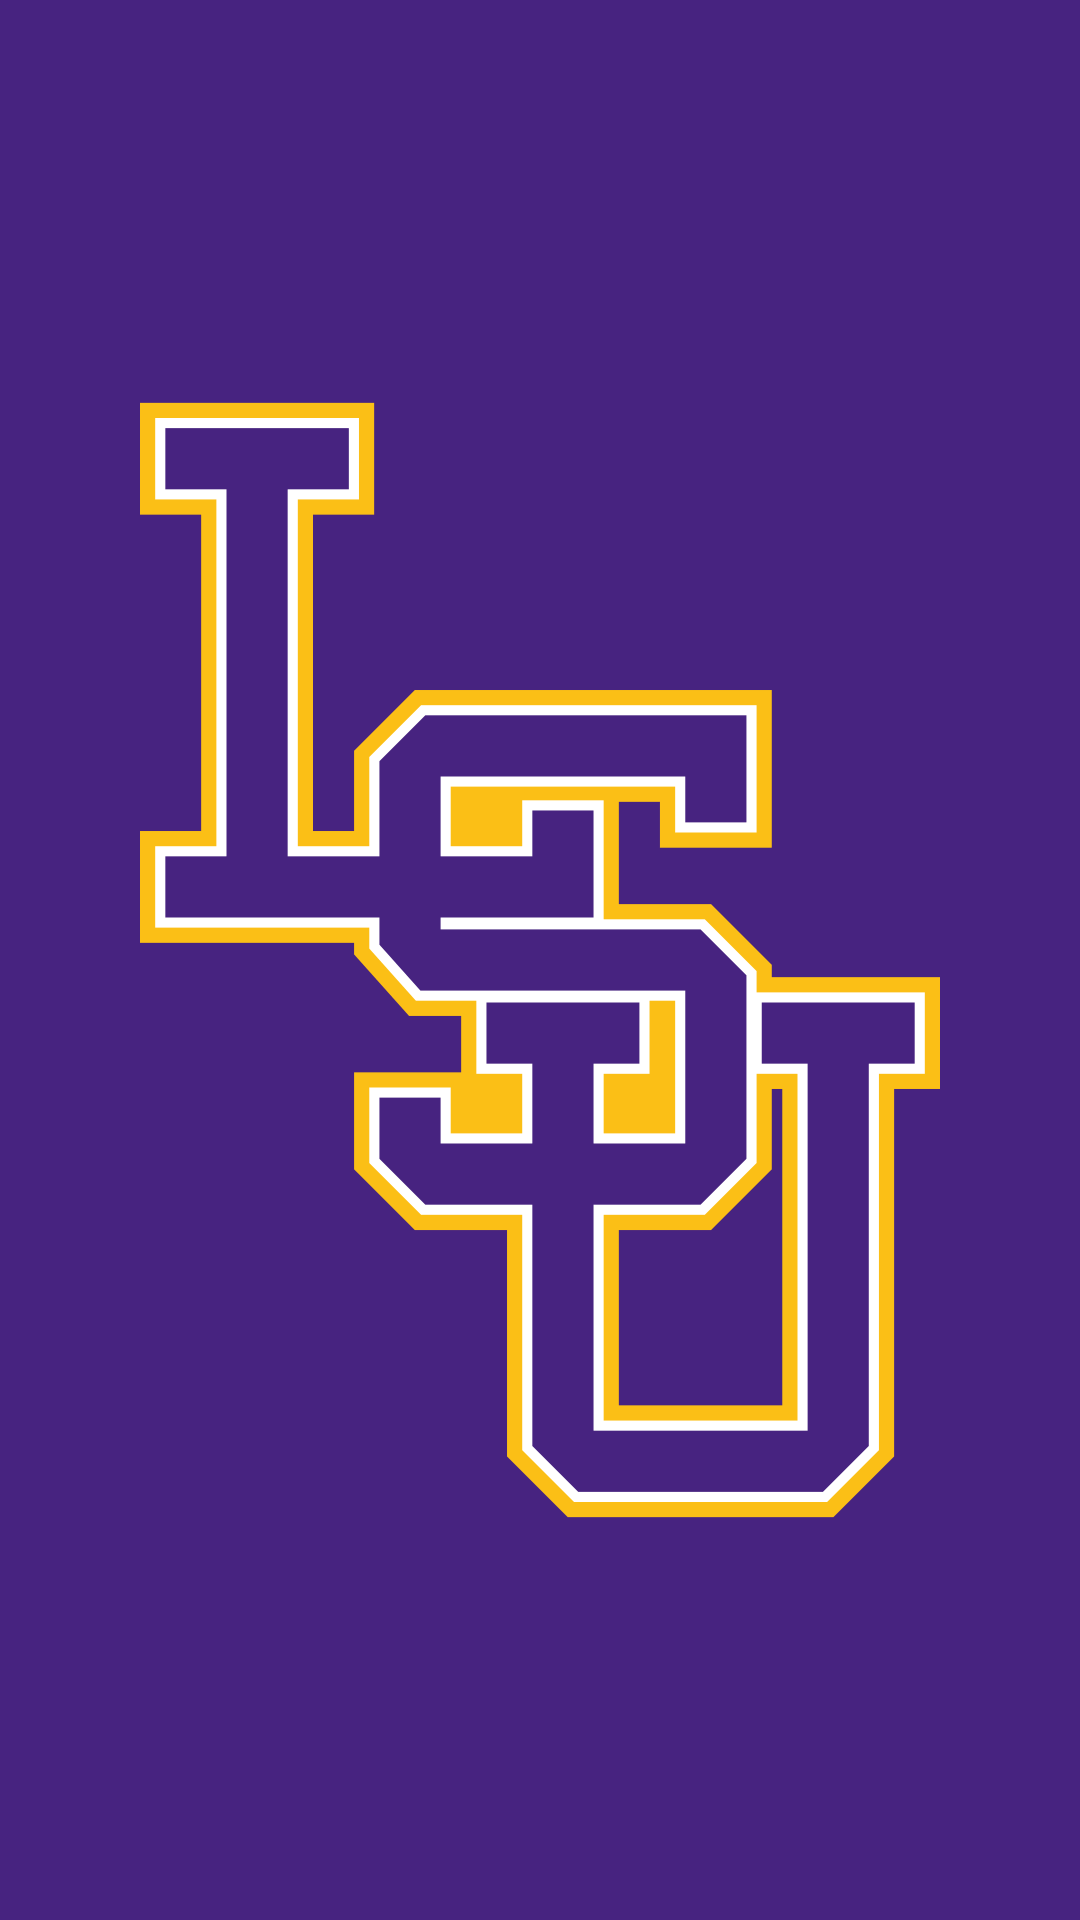 Download free lsu wallpaper for your mobile phone most